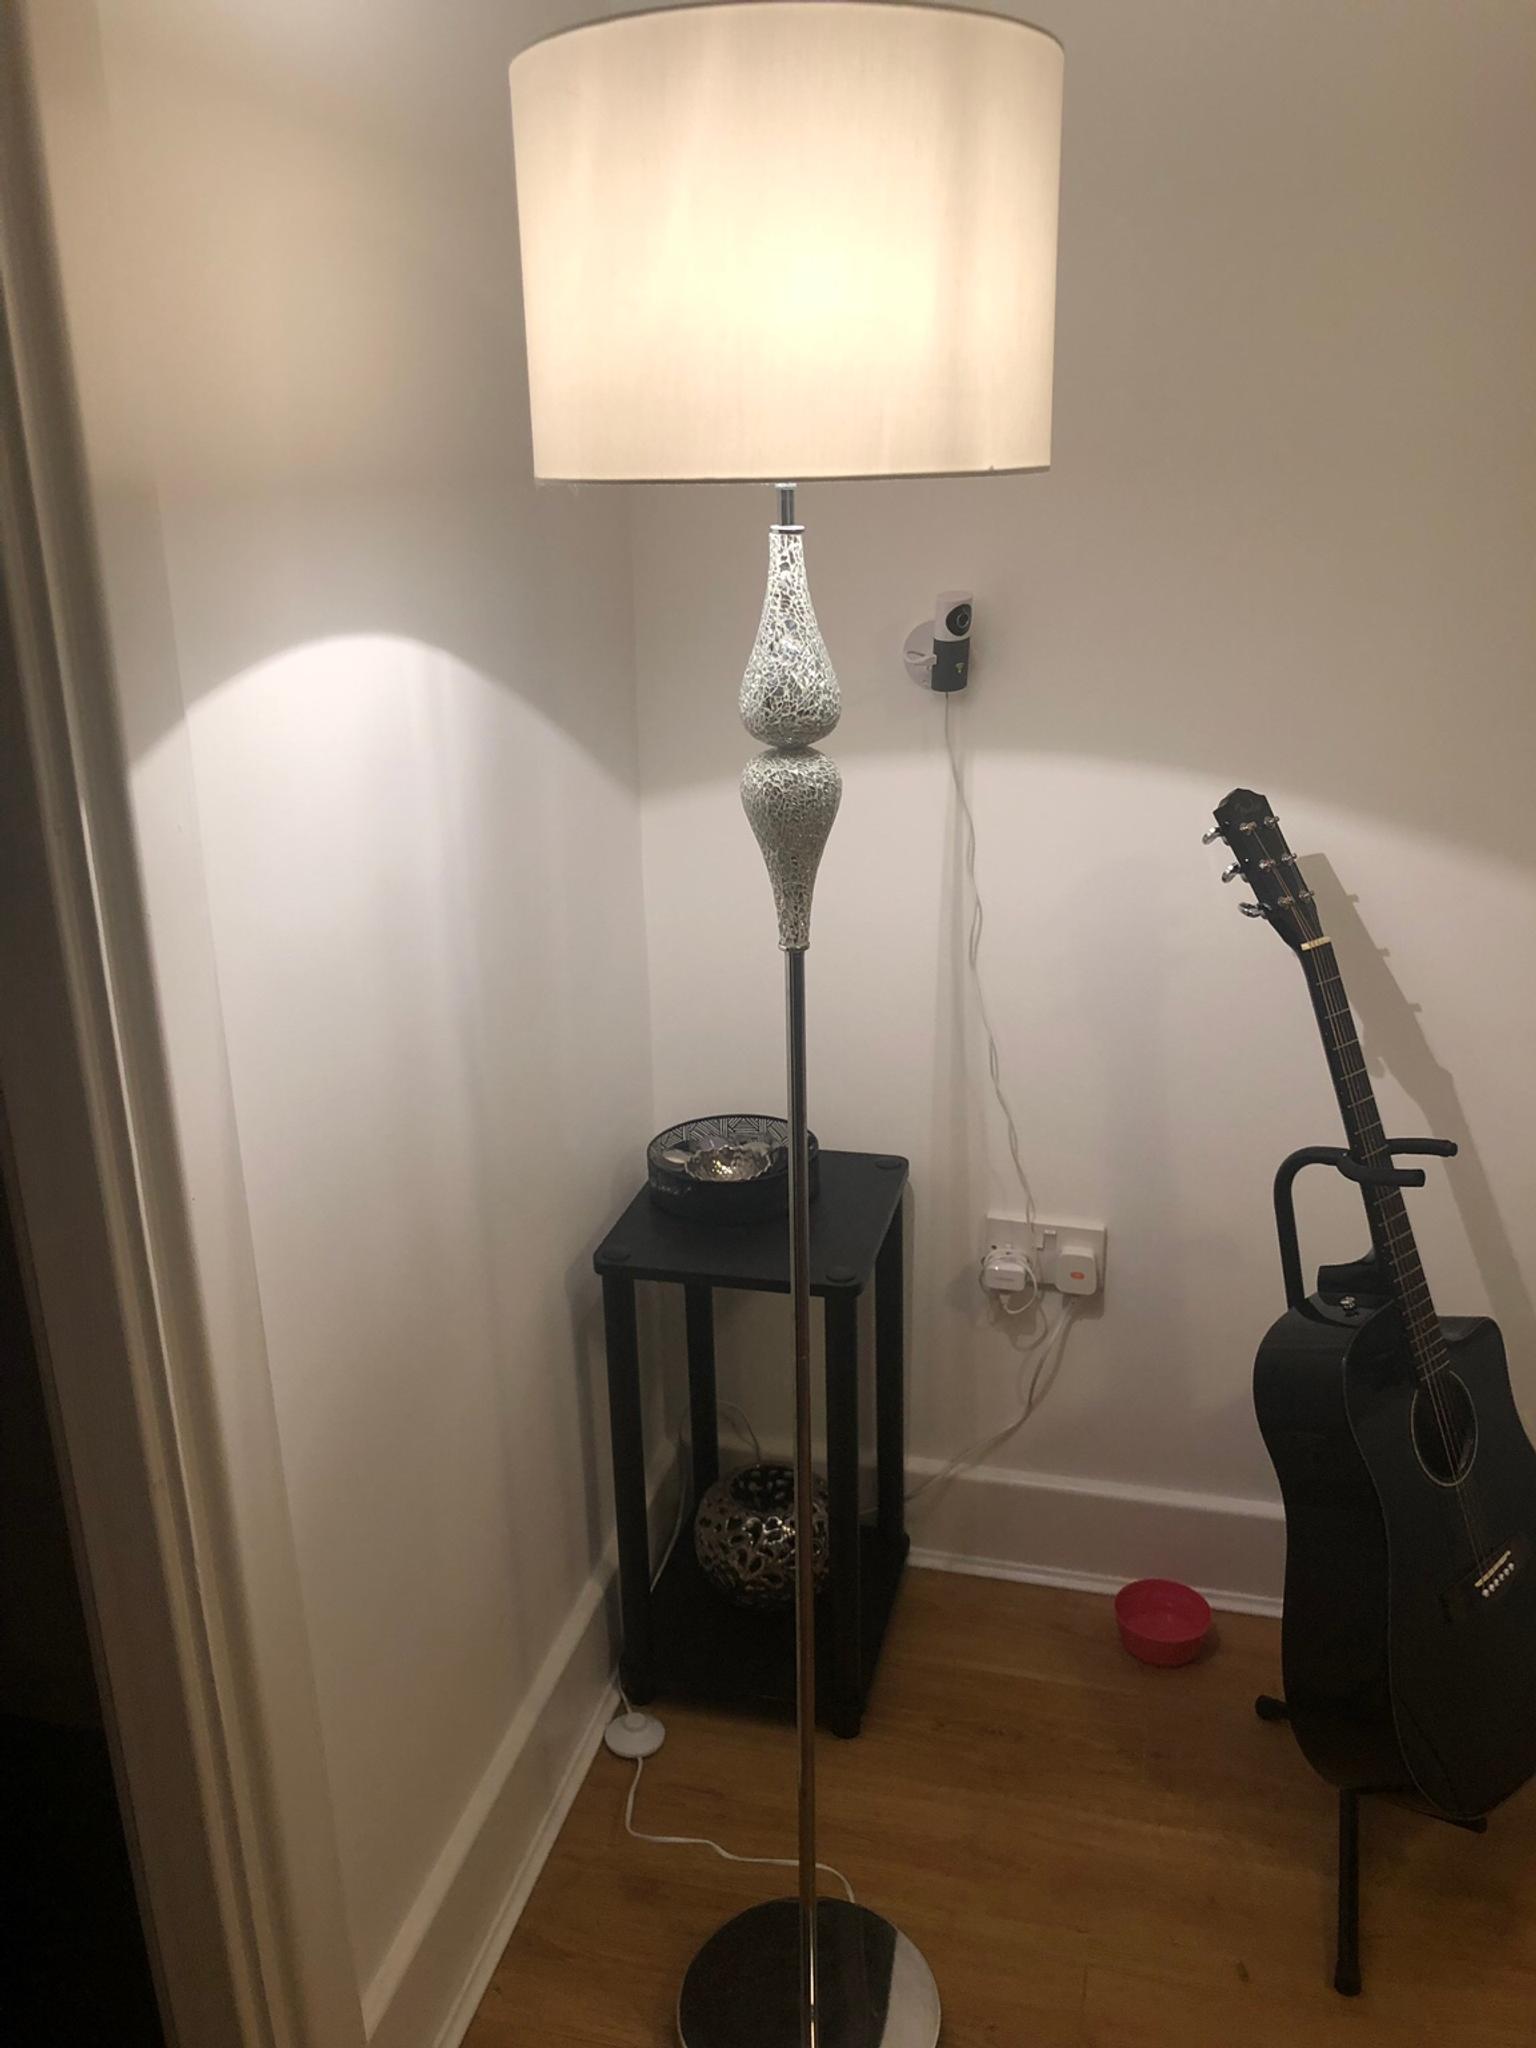 Sparkly Floor Lamp Barely Used In E16 Newham For 30 00 For Sale